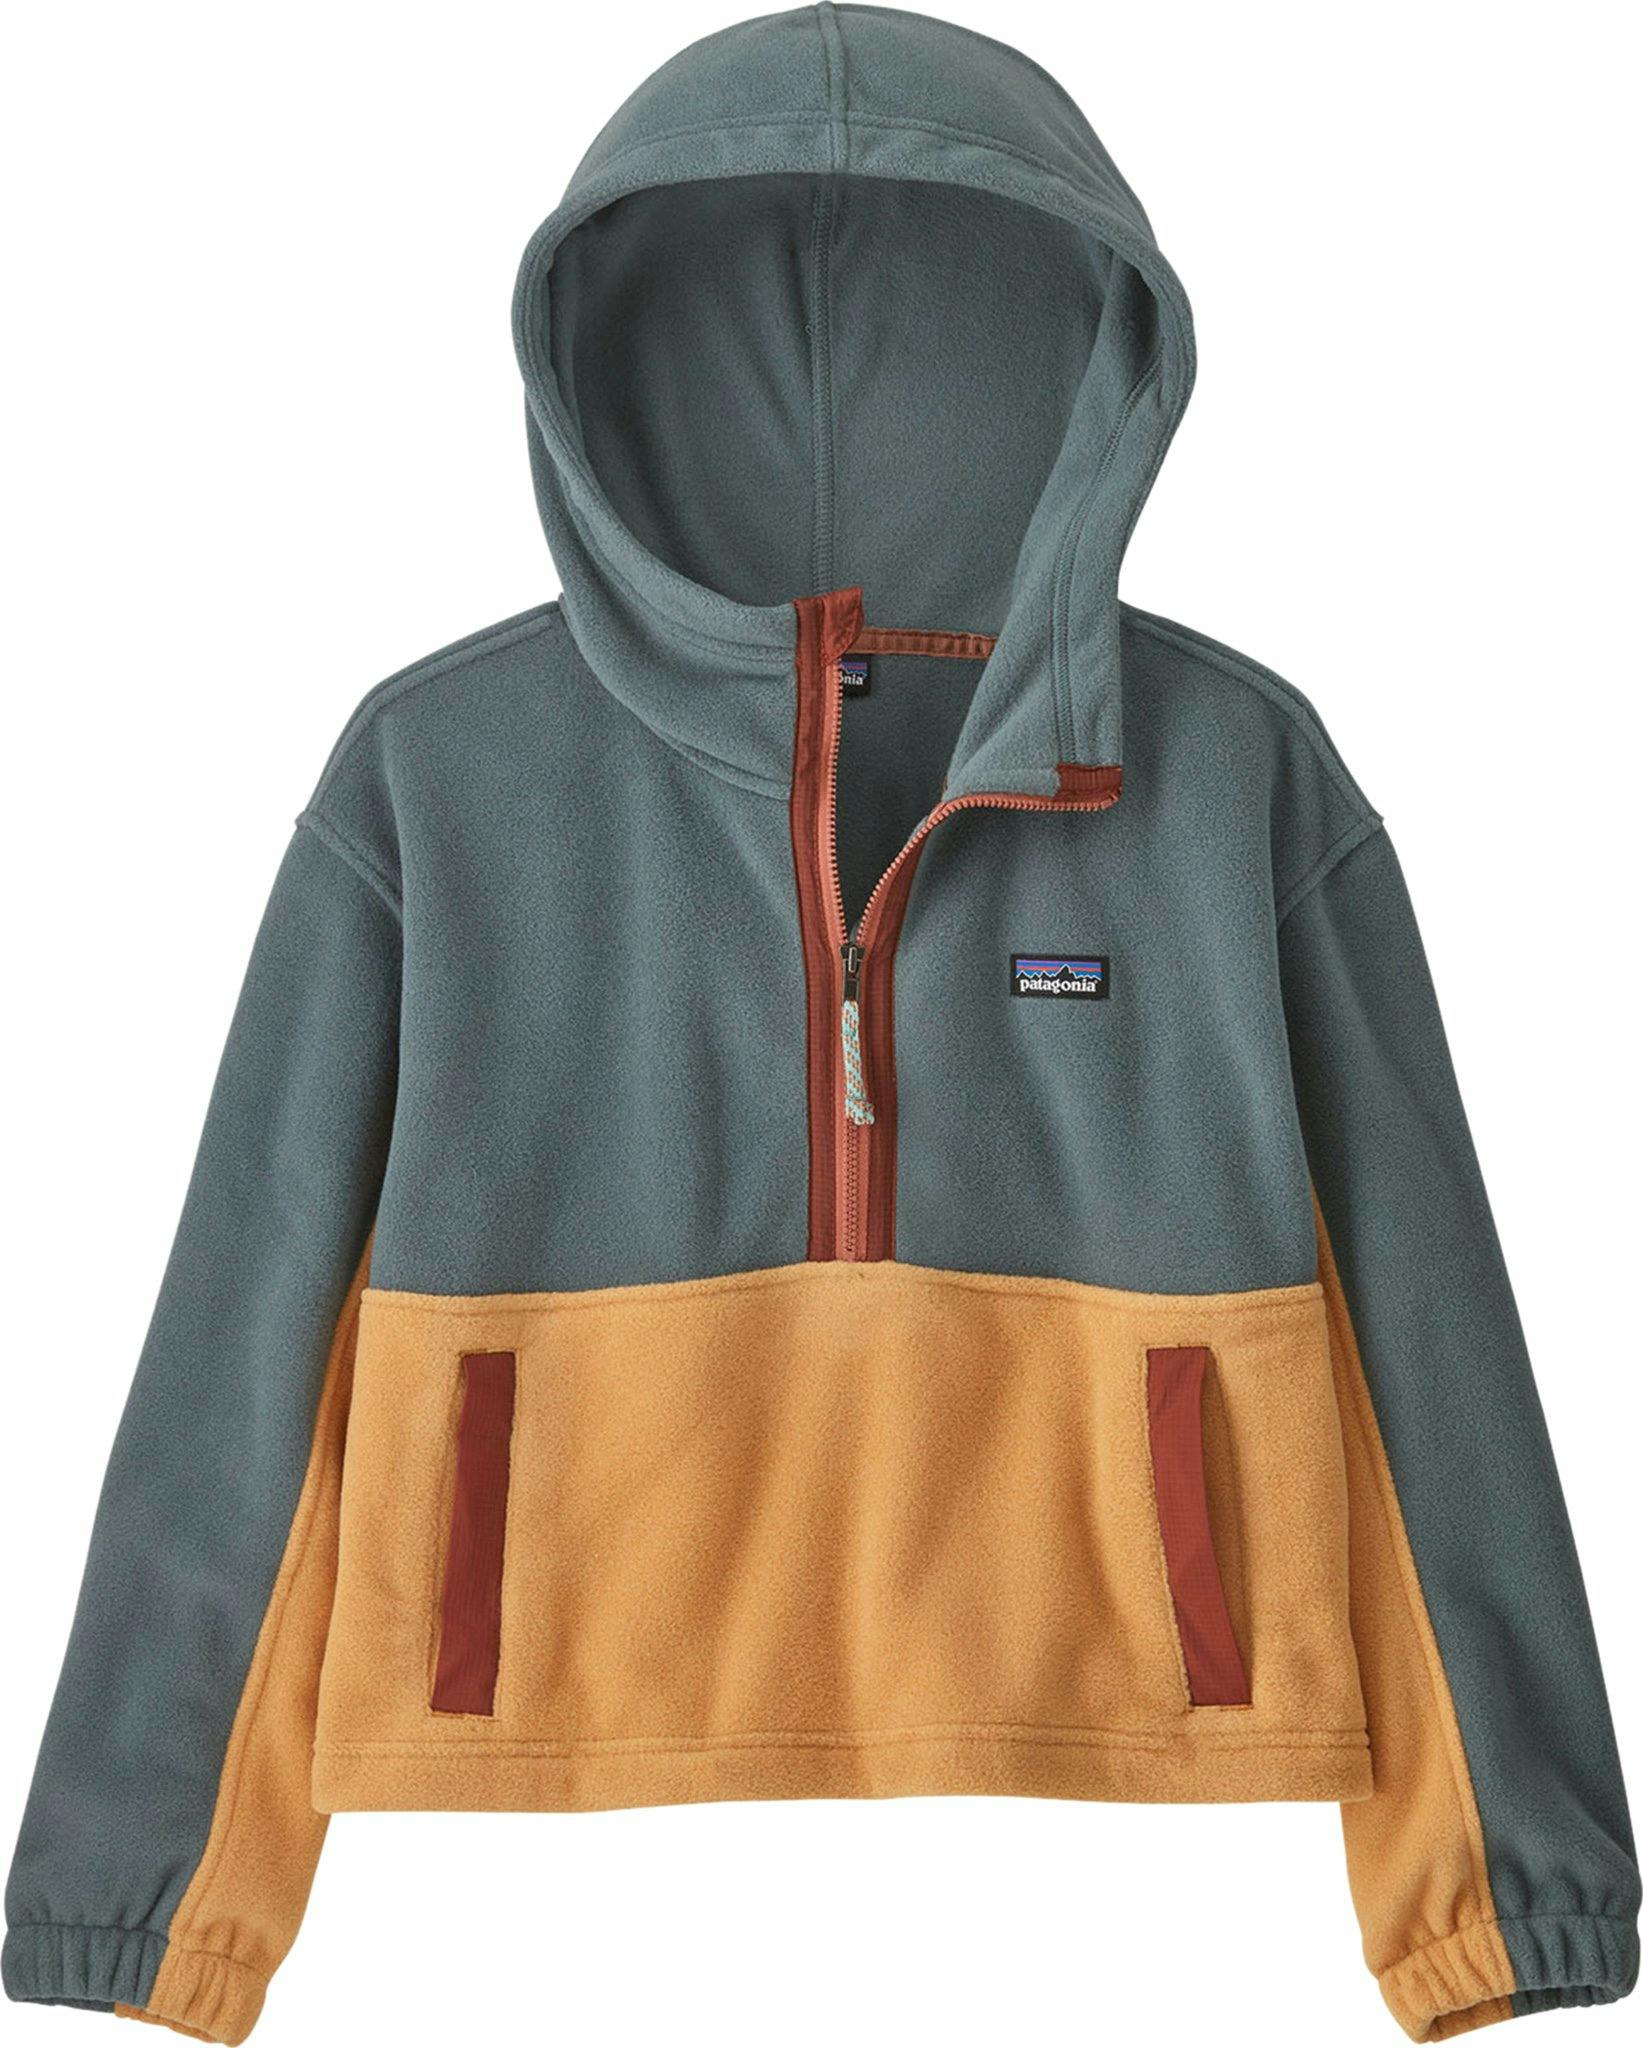 Product image for Microdini Cropped Pullover Hoody - Kids